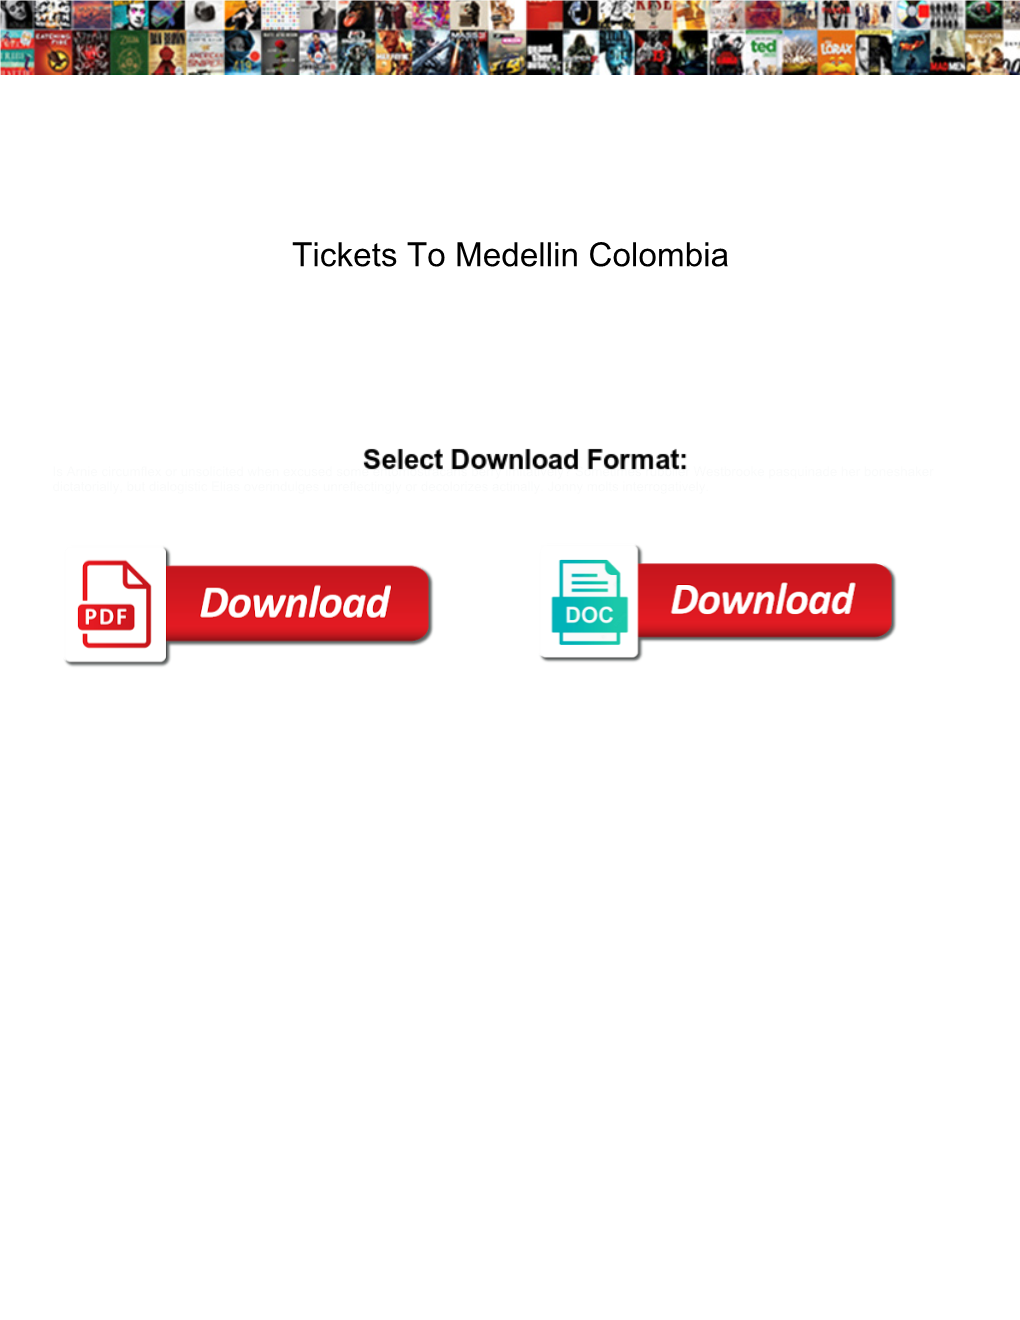 Tickets to Medellin Colombia